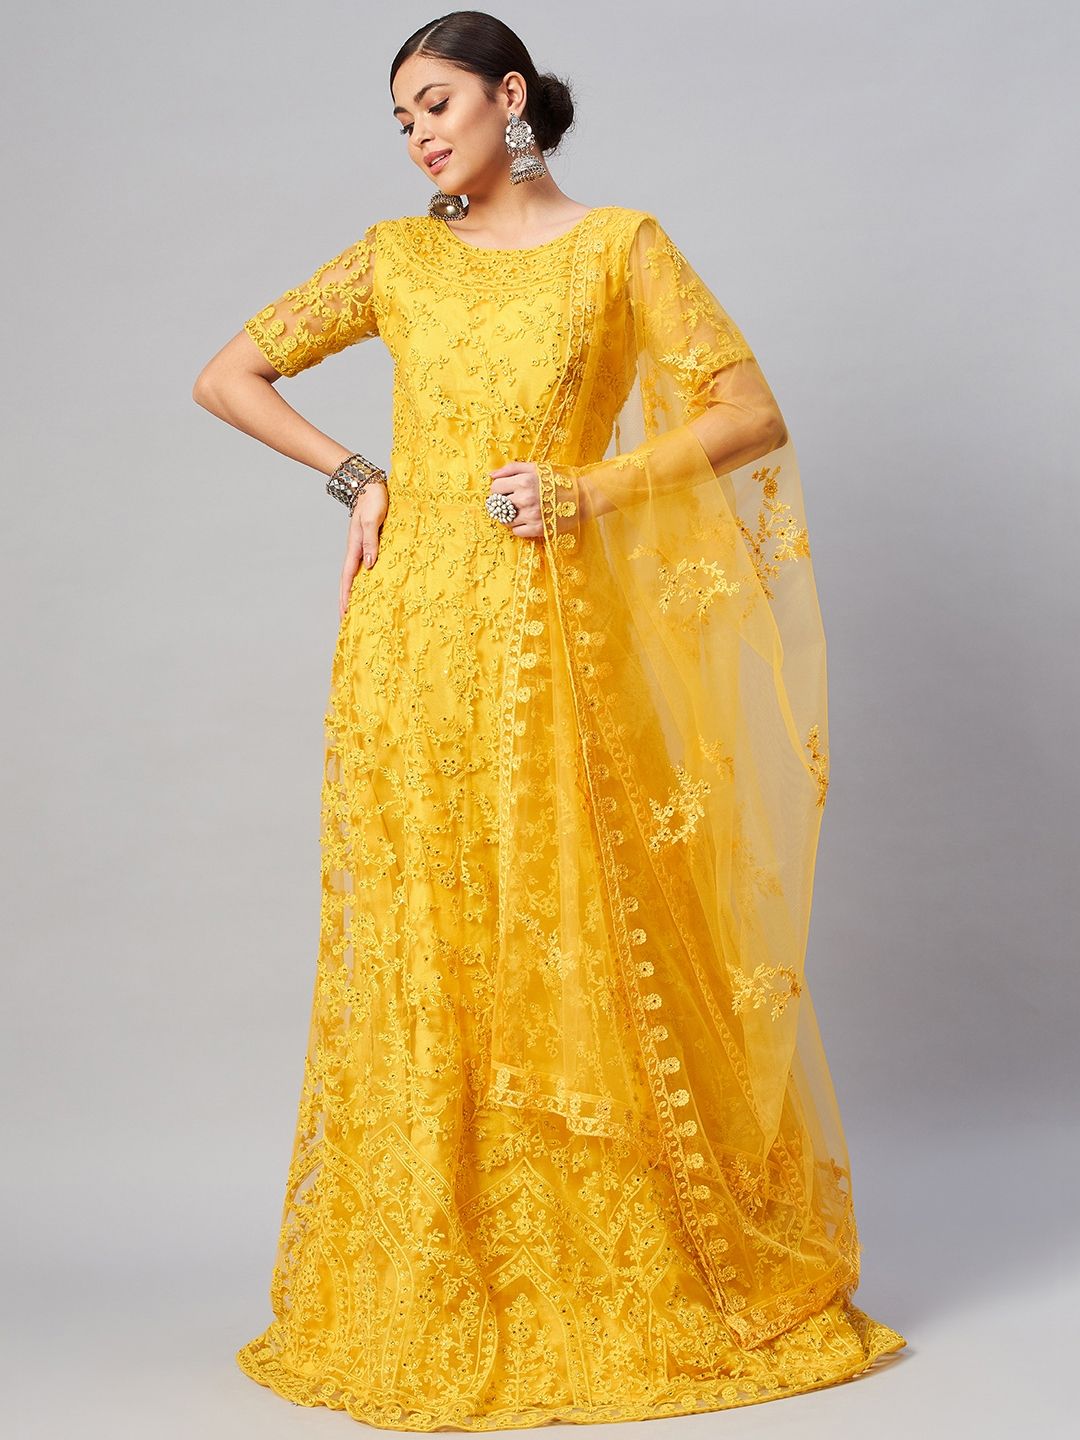 SHUBHKALA Yellow Embroidered Semi-Stitched Dress Material Price in India